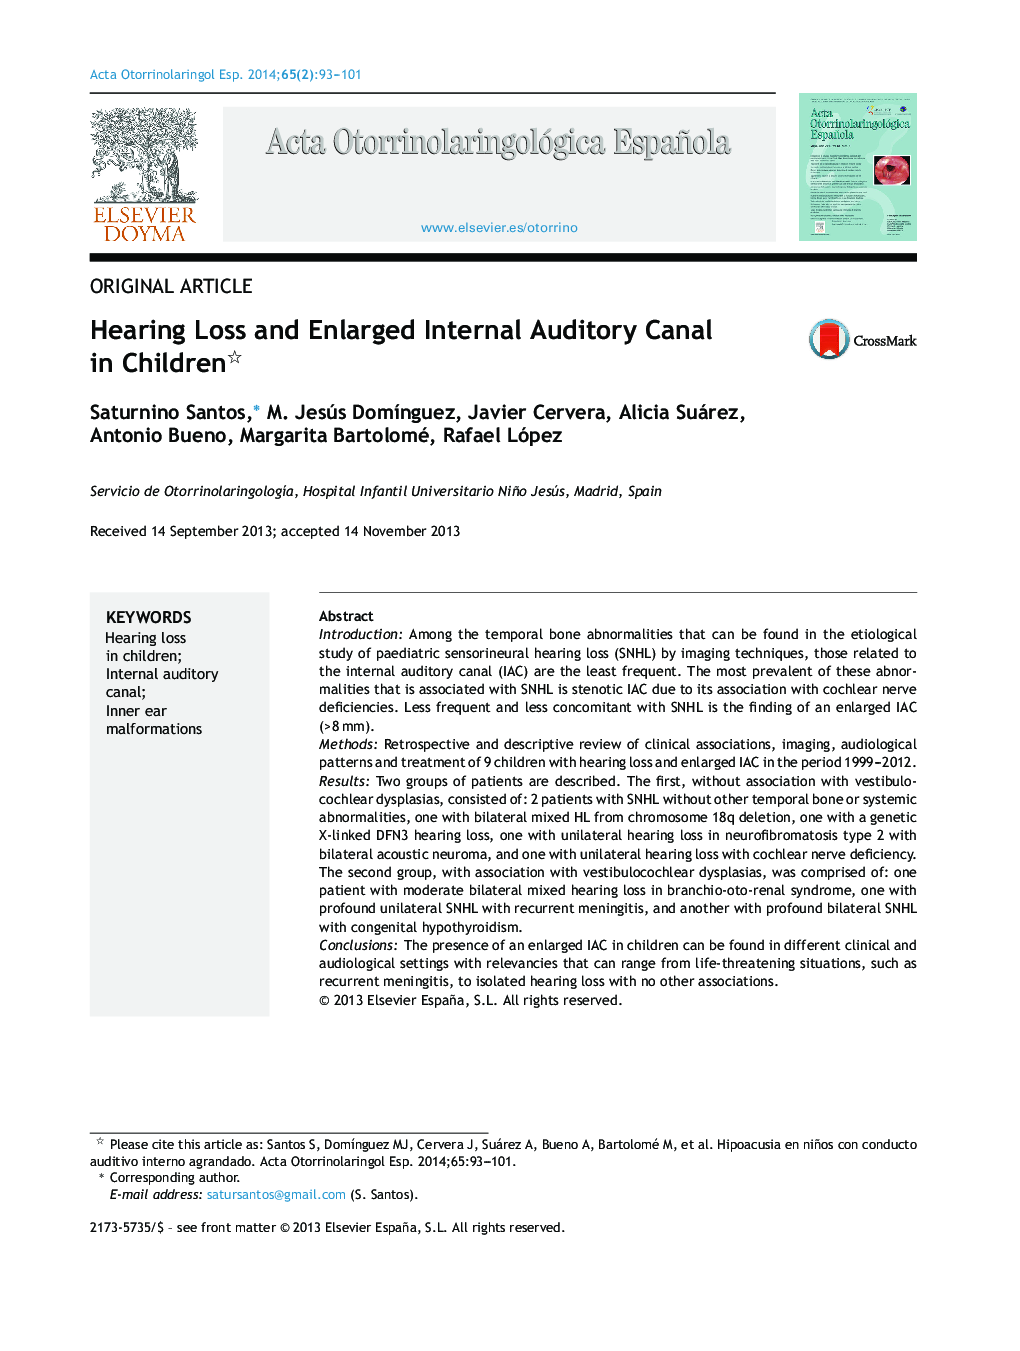 Hearing Loss and Enlarged Internal Auditory Canal in Children 